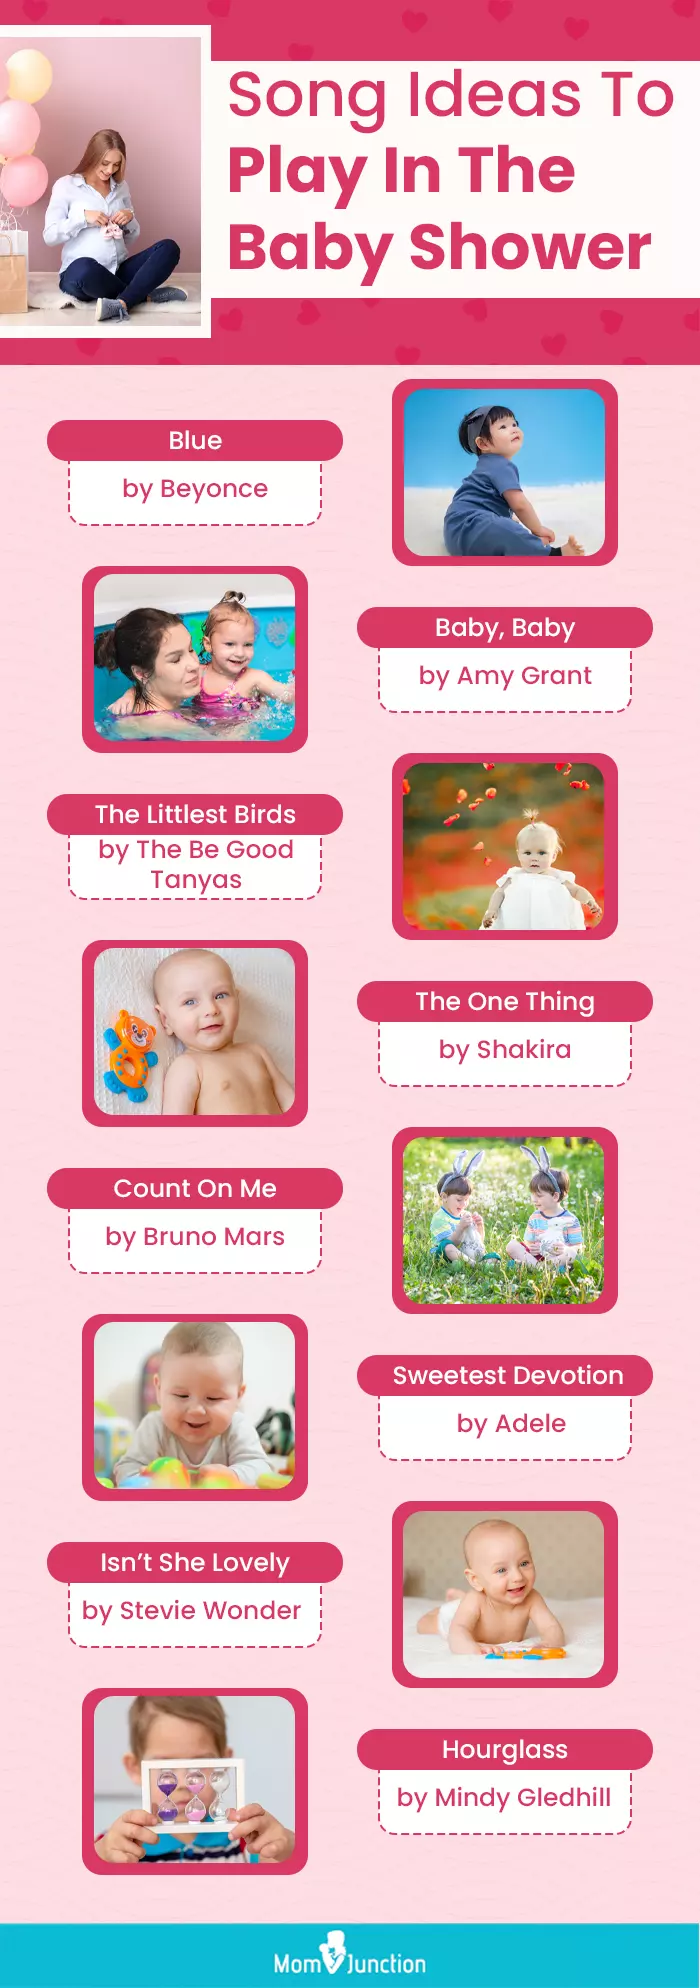 song ideas to play in the baby shower (infographic)